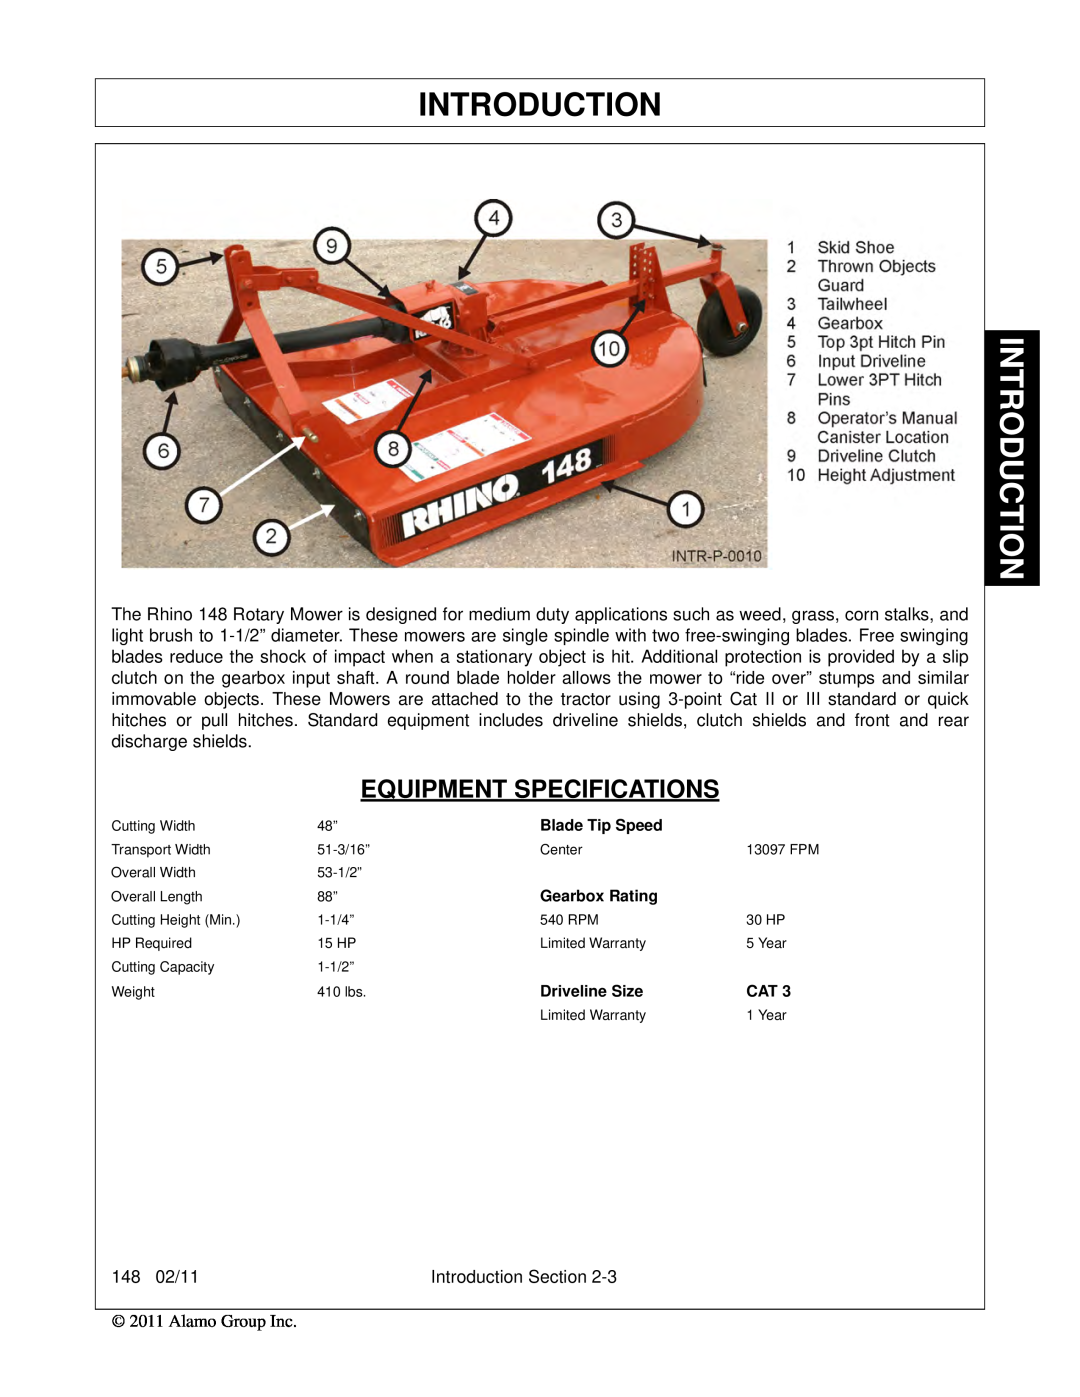 Rhino Mounts 148 manual Equipment Specifications, Introduction, Blade Tip Speed, Gearbox Rating, Driveline Size 